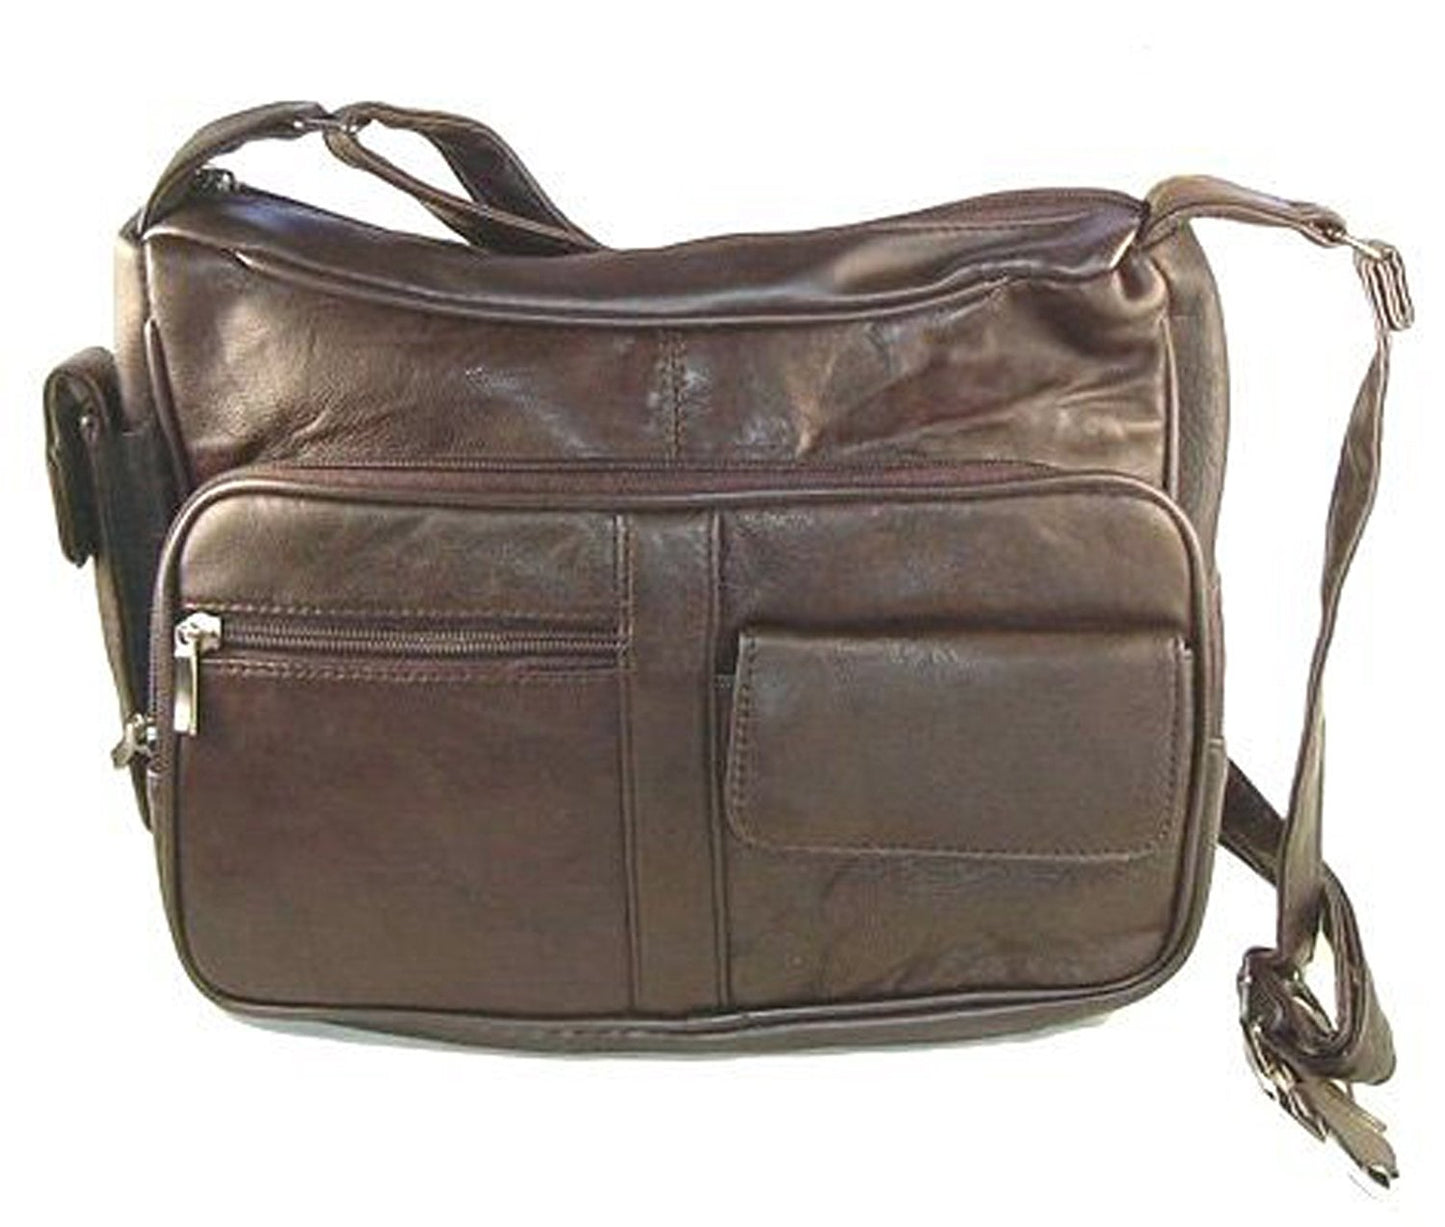 Roma Leathers Brown Leather Crossbody Shoulder Bag